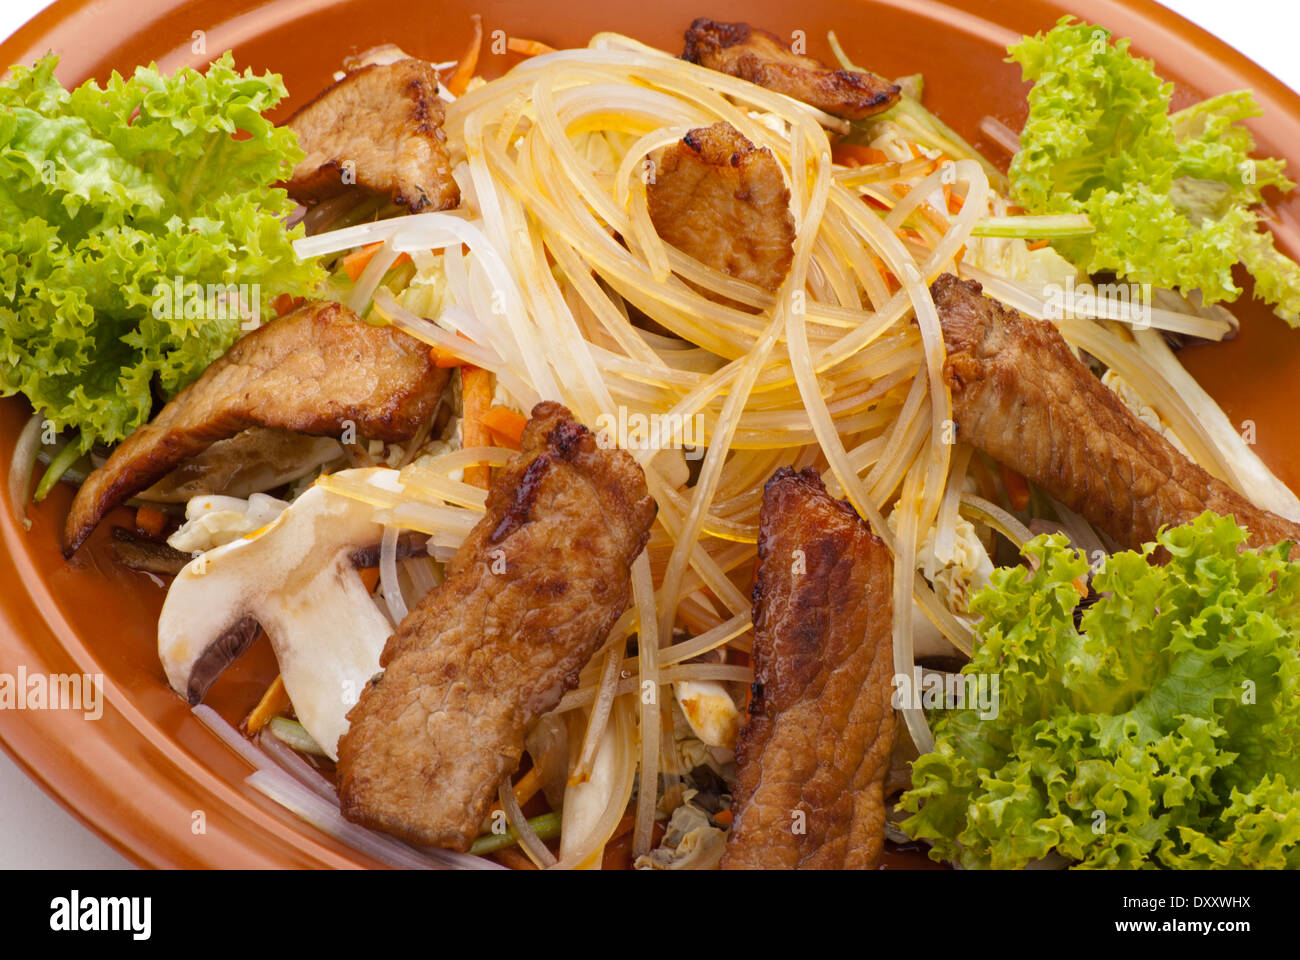 Fried Noodles with Beef and Vegetables. Garnished with Salad Leaf Stock Photo